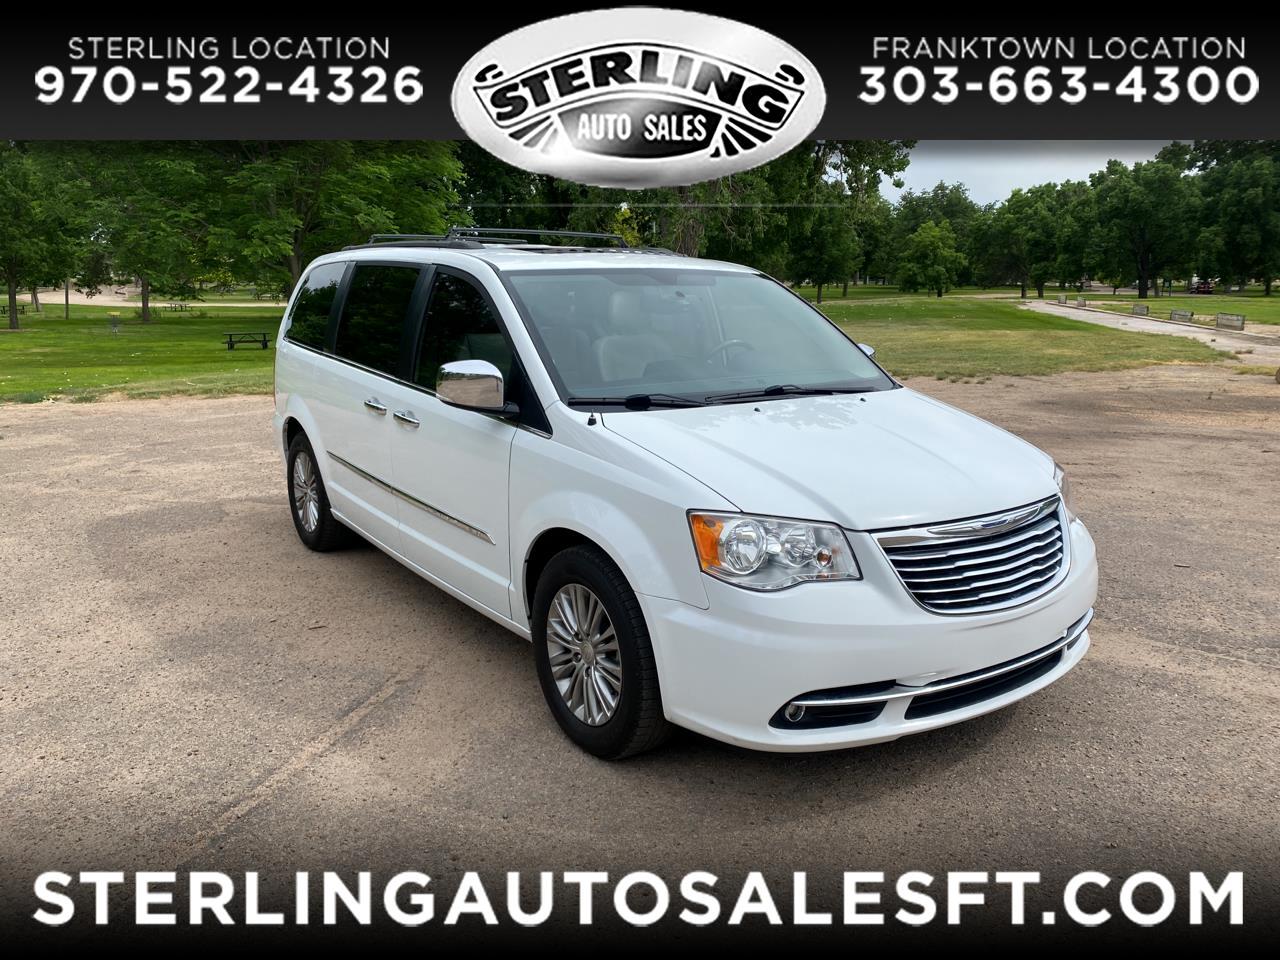 Chrysler Town & Country 3dr Wgn 113" WB LX FWD 2016